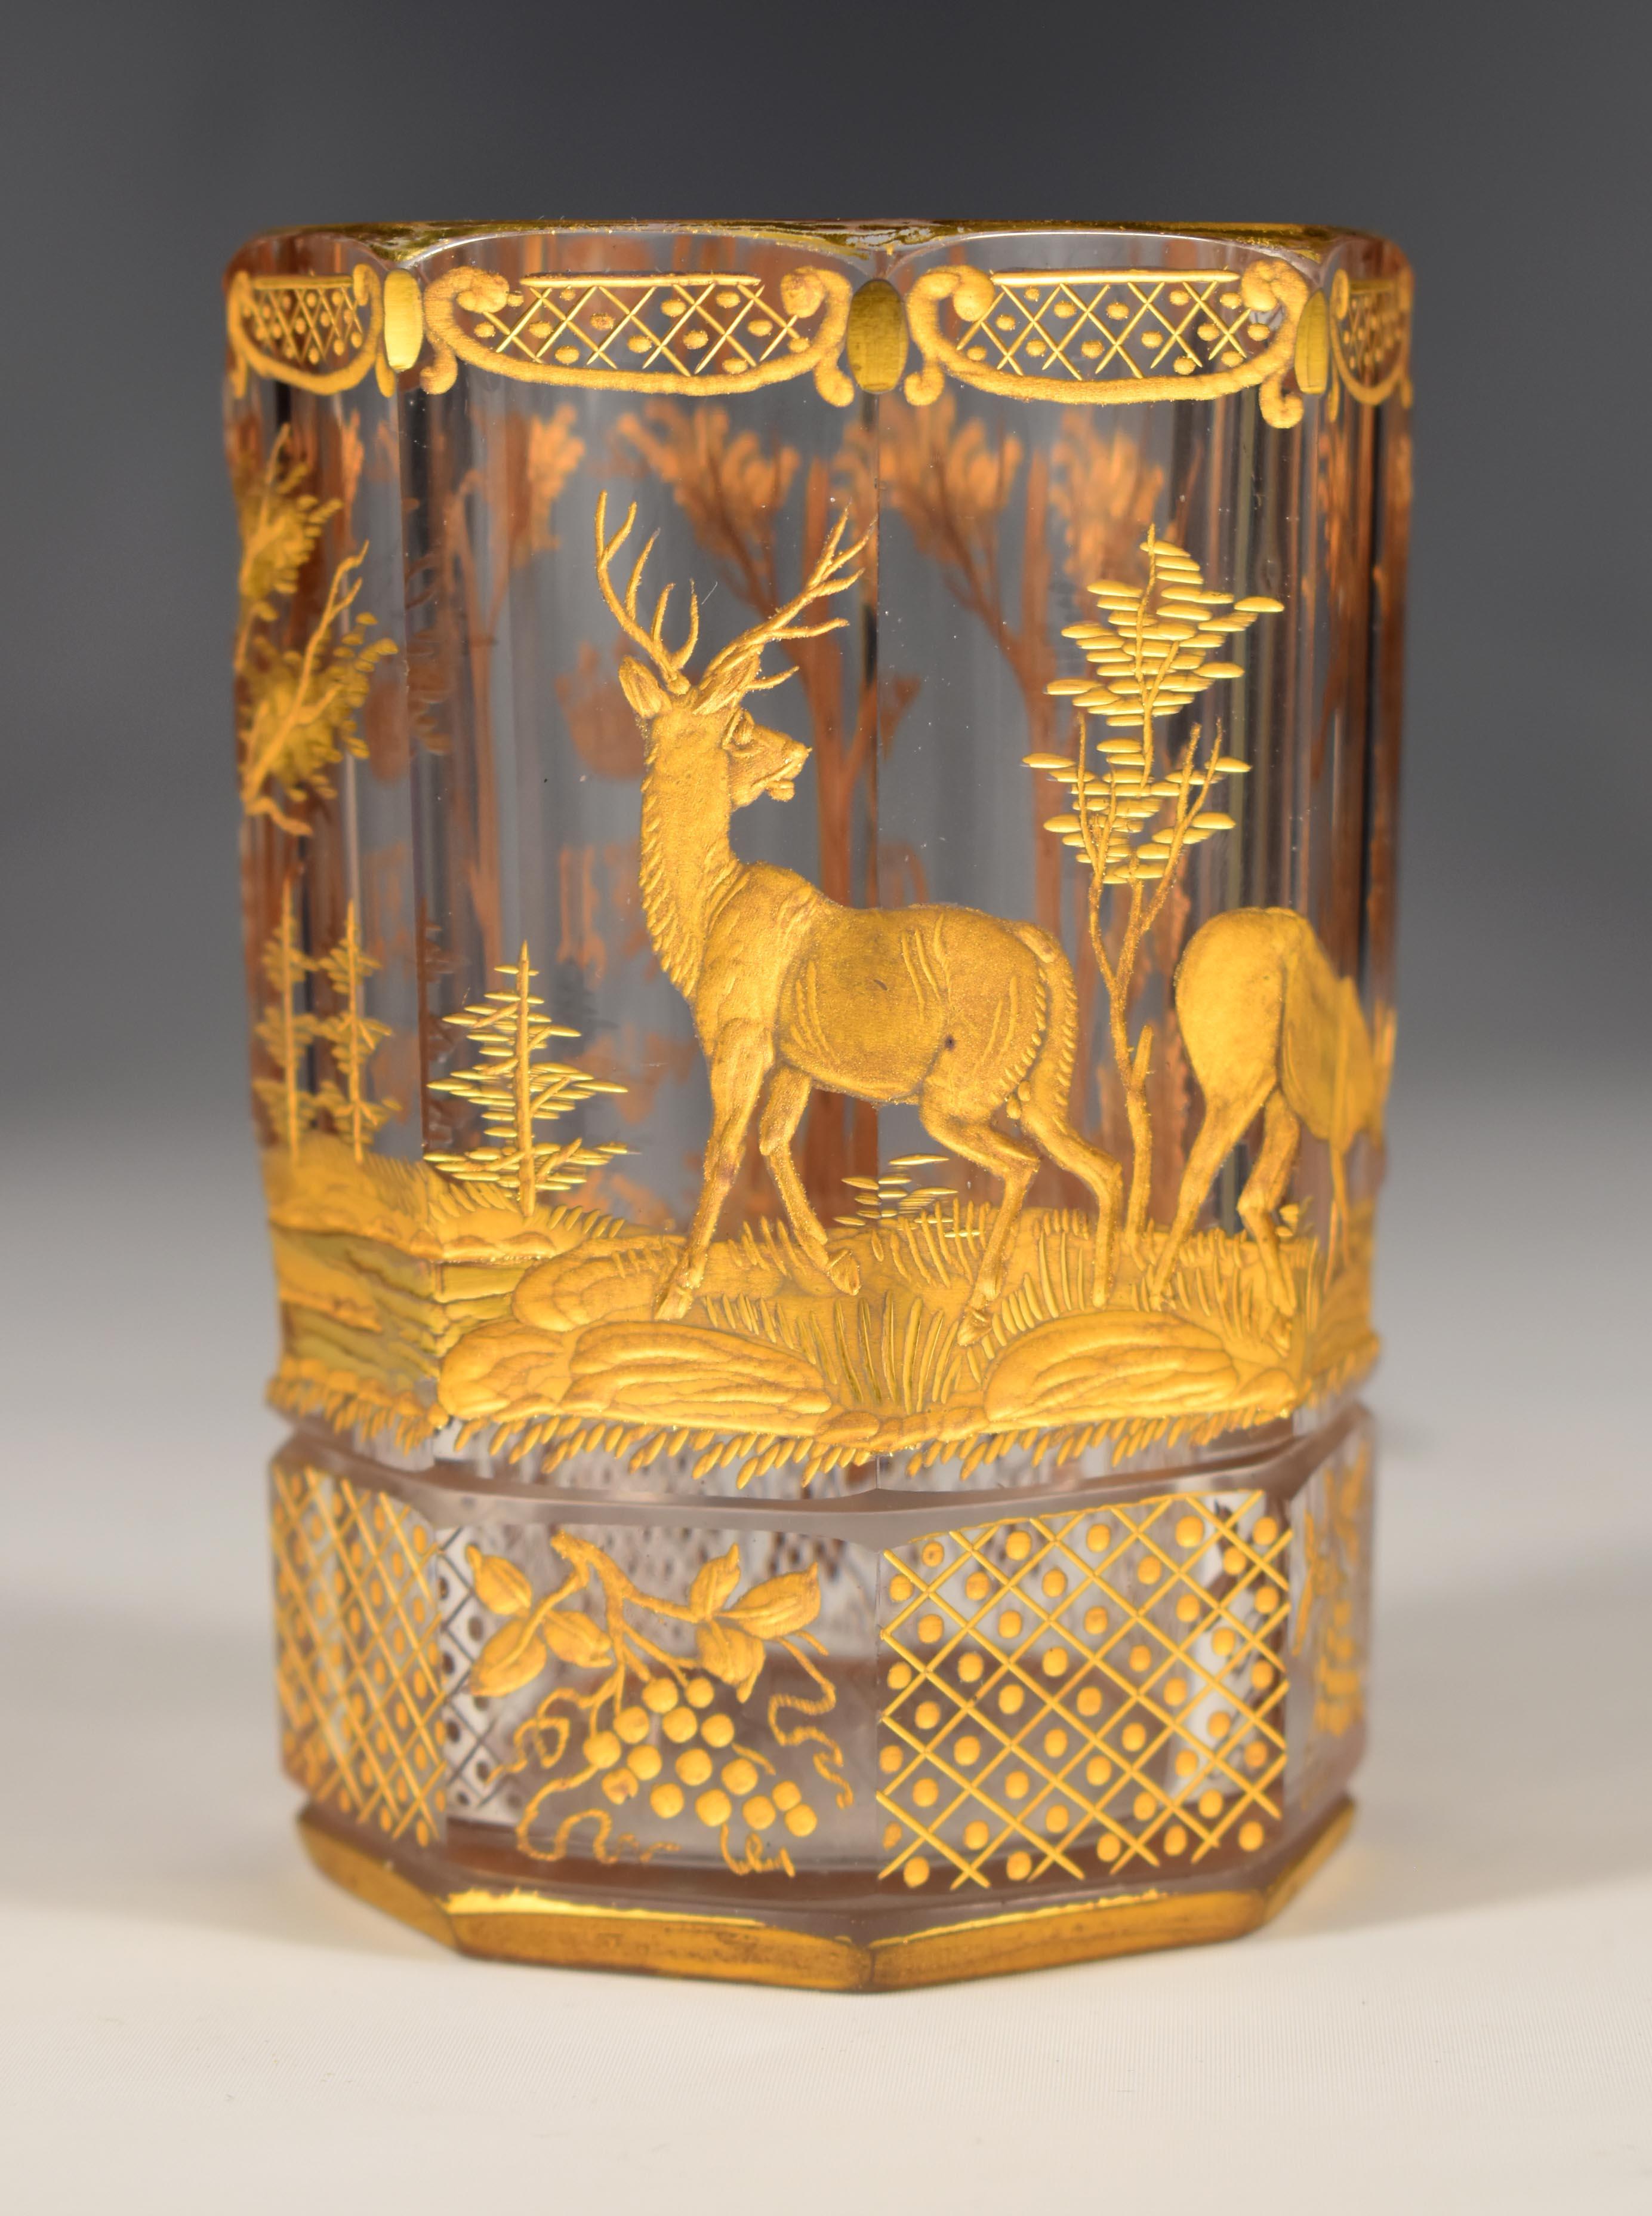 Gilded Vase + Two Gilded Glasses - Hunting motif. 20th century For Sale 6